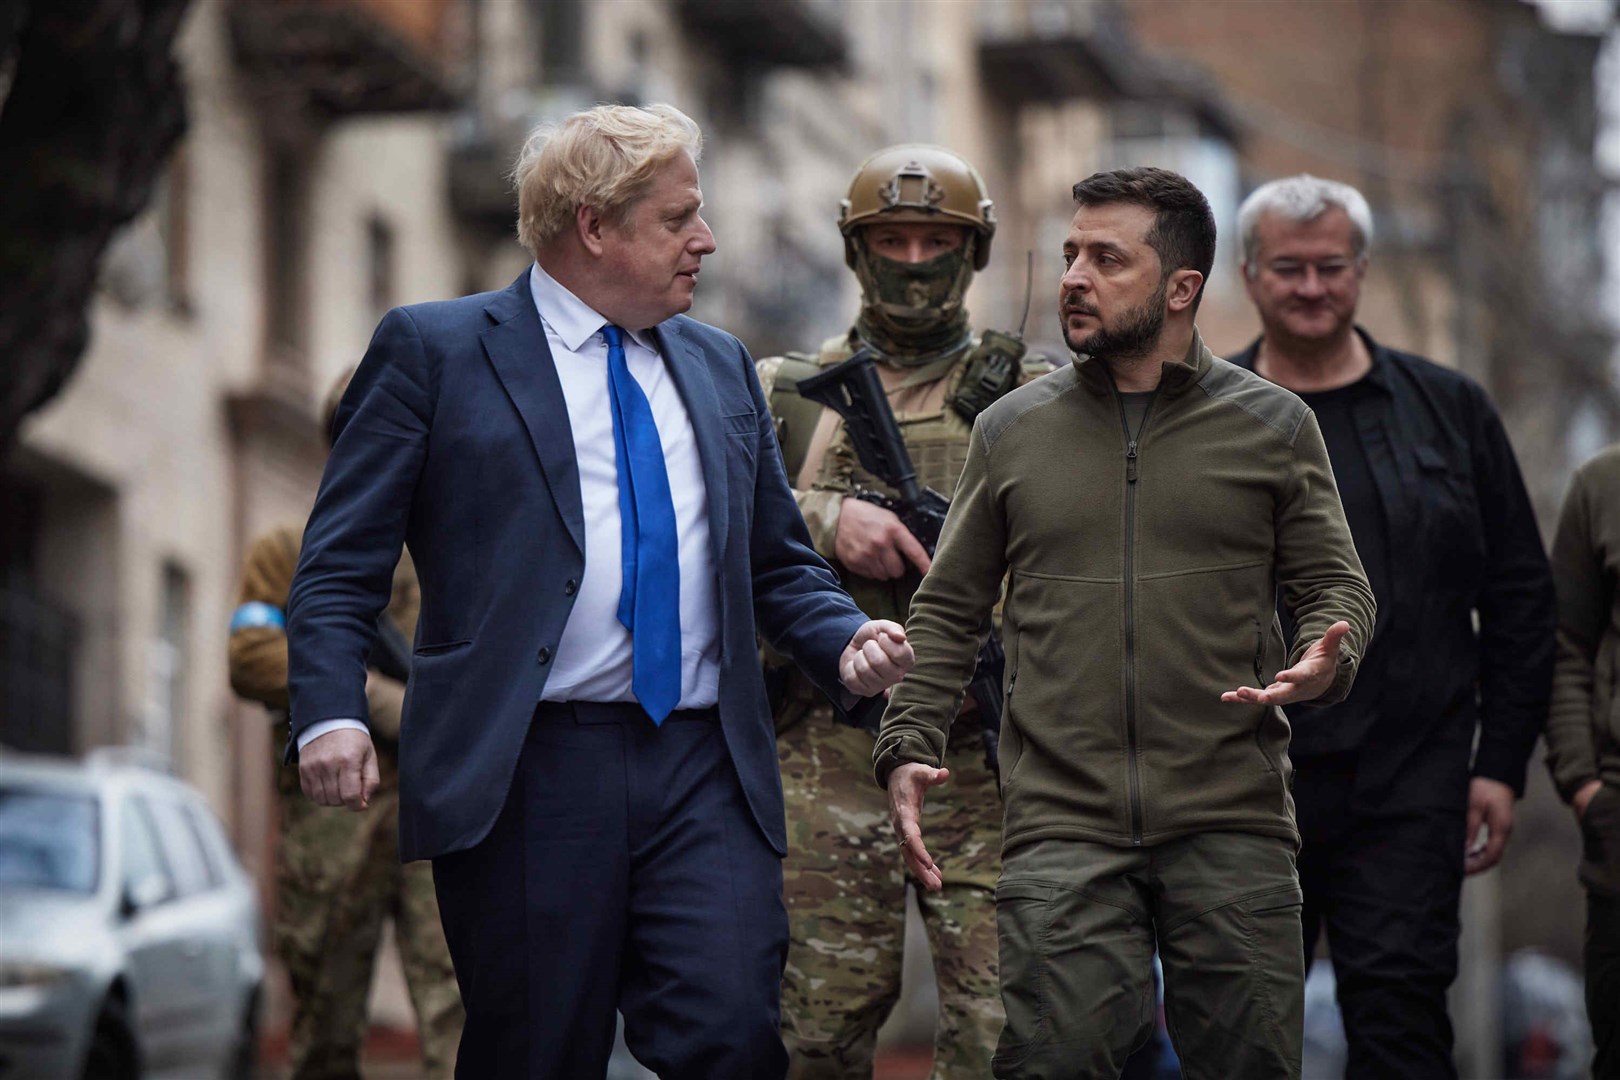 Prime Minister Boris Johnson with President of Ukraine Volodymyr Zelensky, during his visit to Kyiv in April (PA)